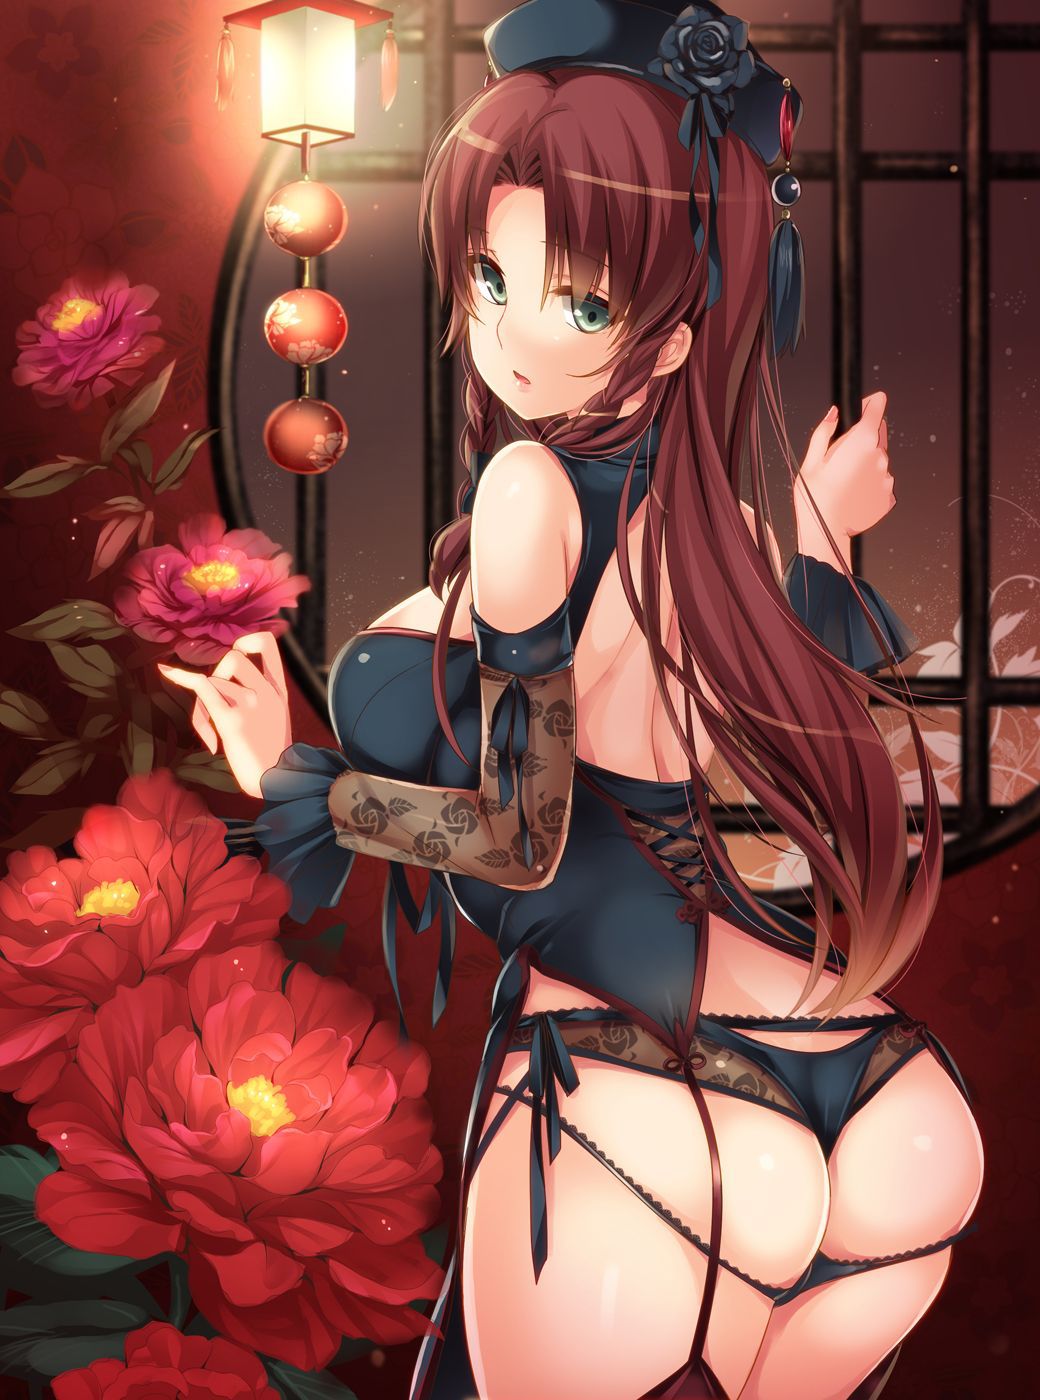 [Secondary ZIP] The second image of the odious garter belt daughter in stylish 2